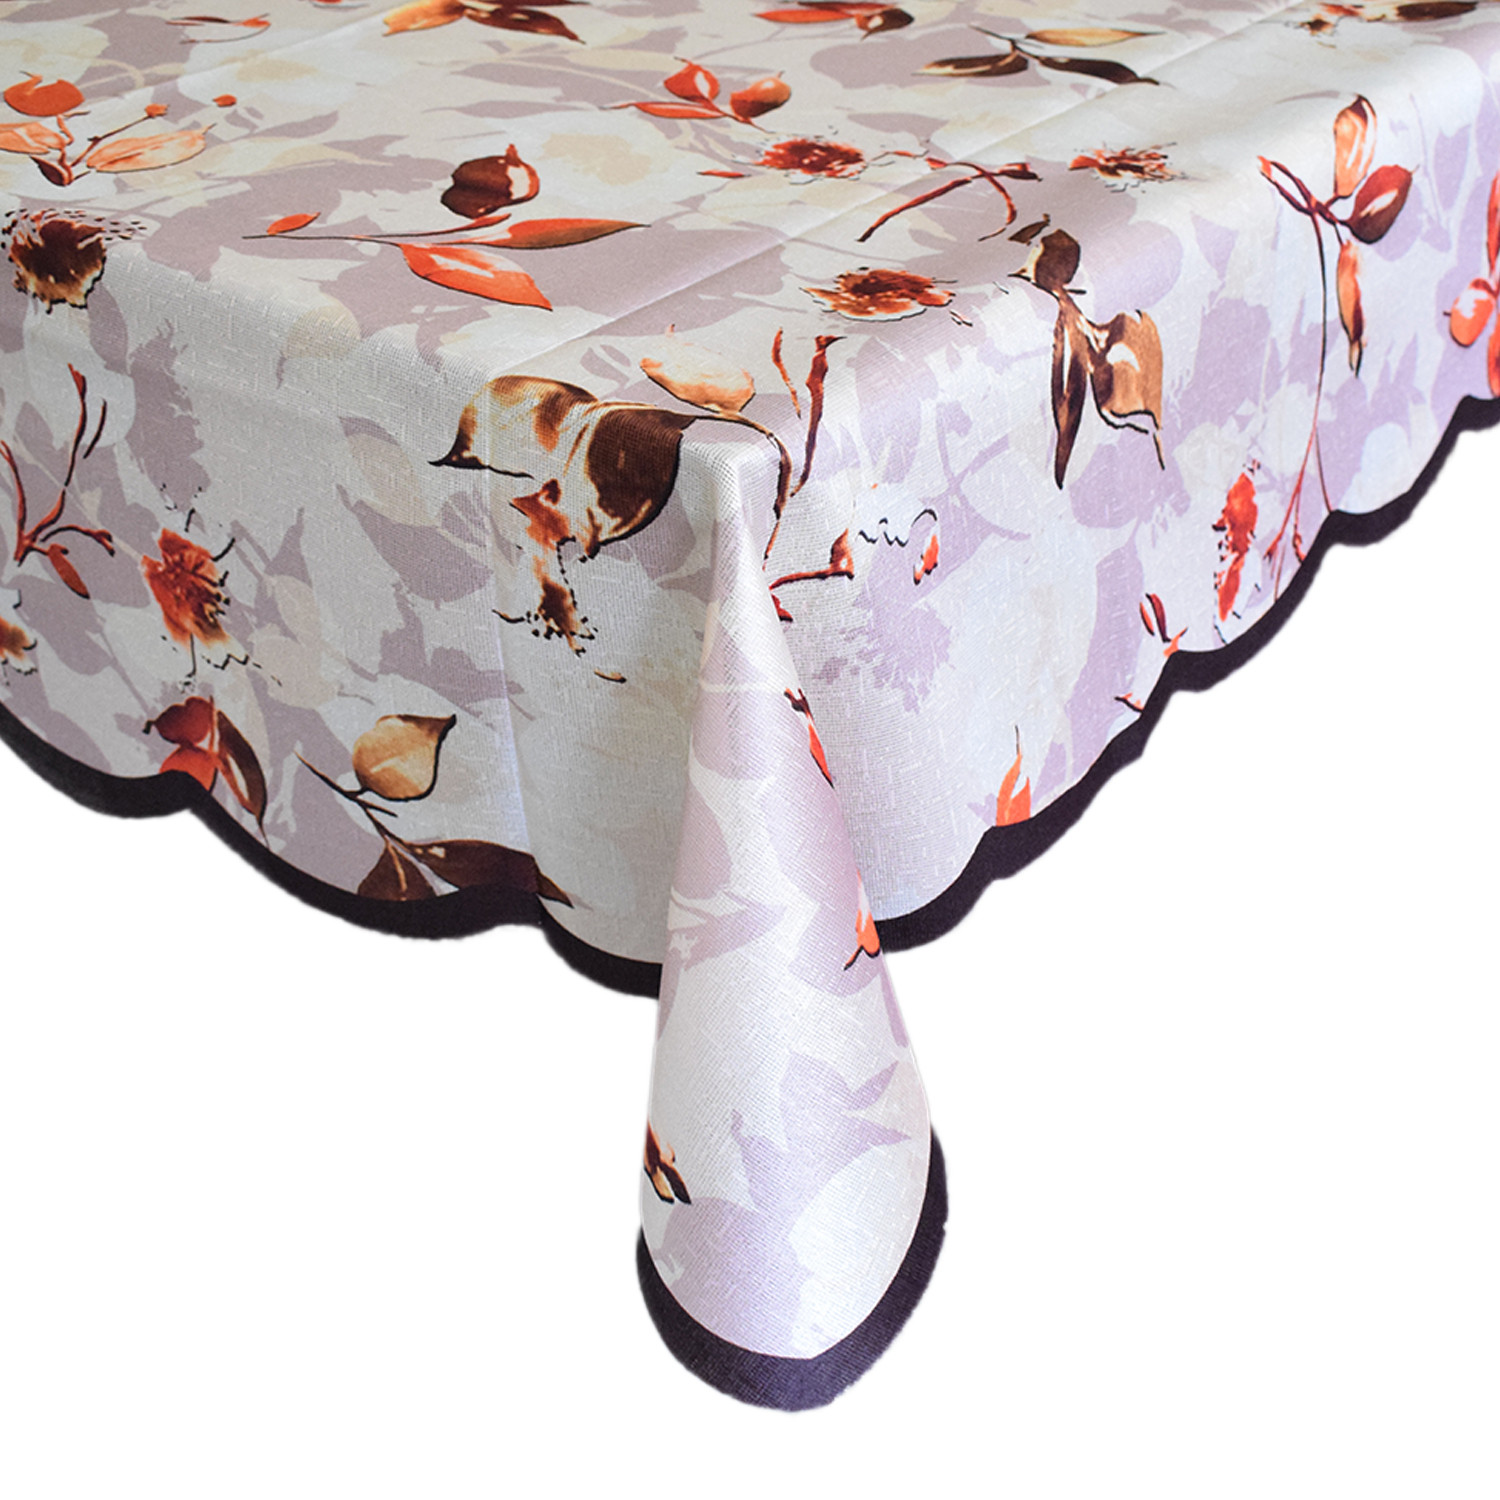 Kuber Industries Flower Printed Soft Cotton 6 Seater Dinning Table Cover- 60